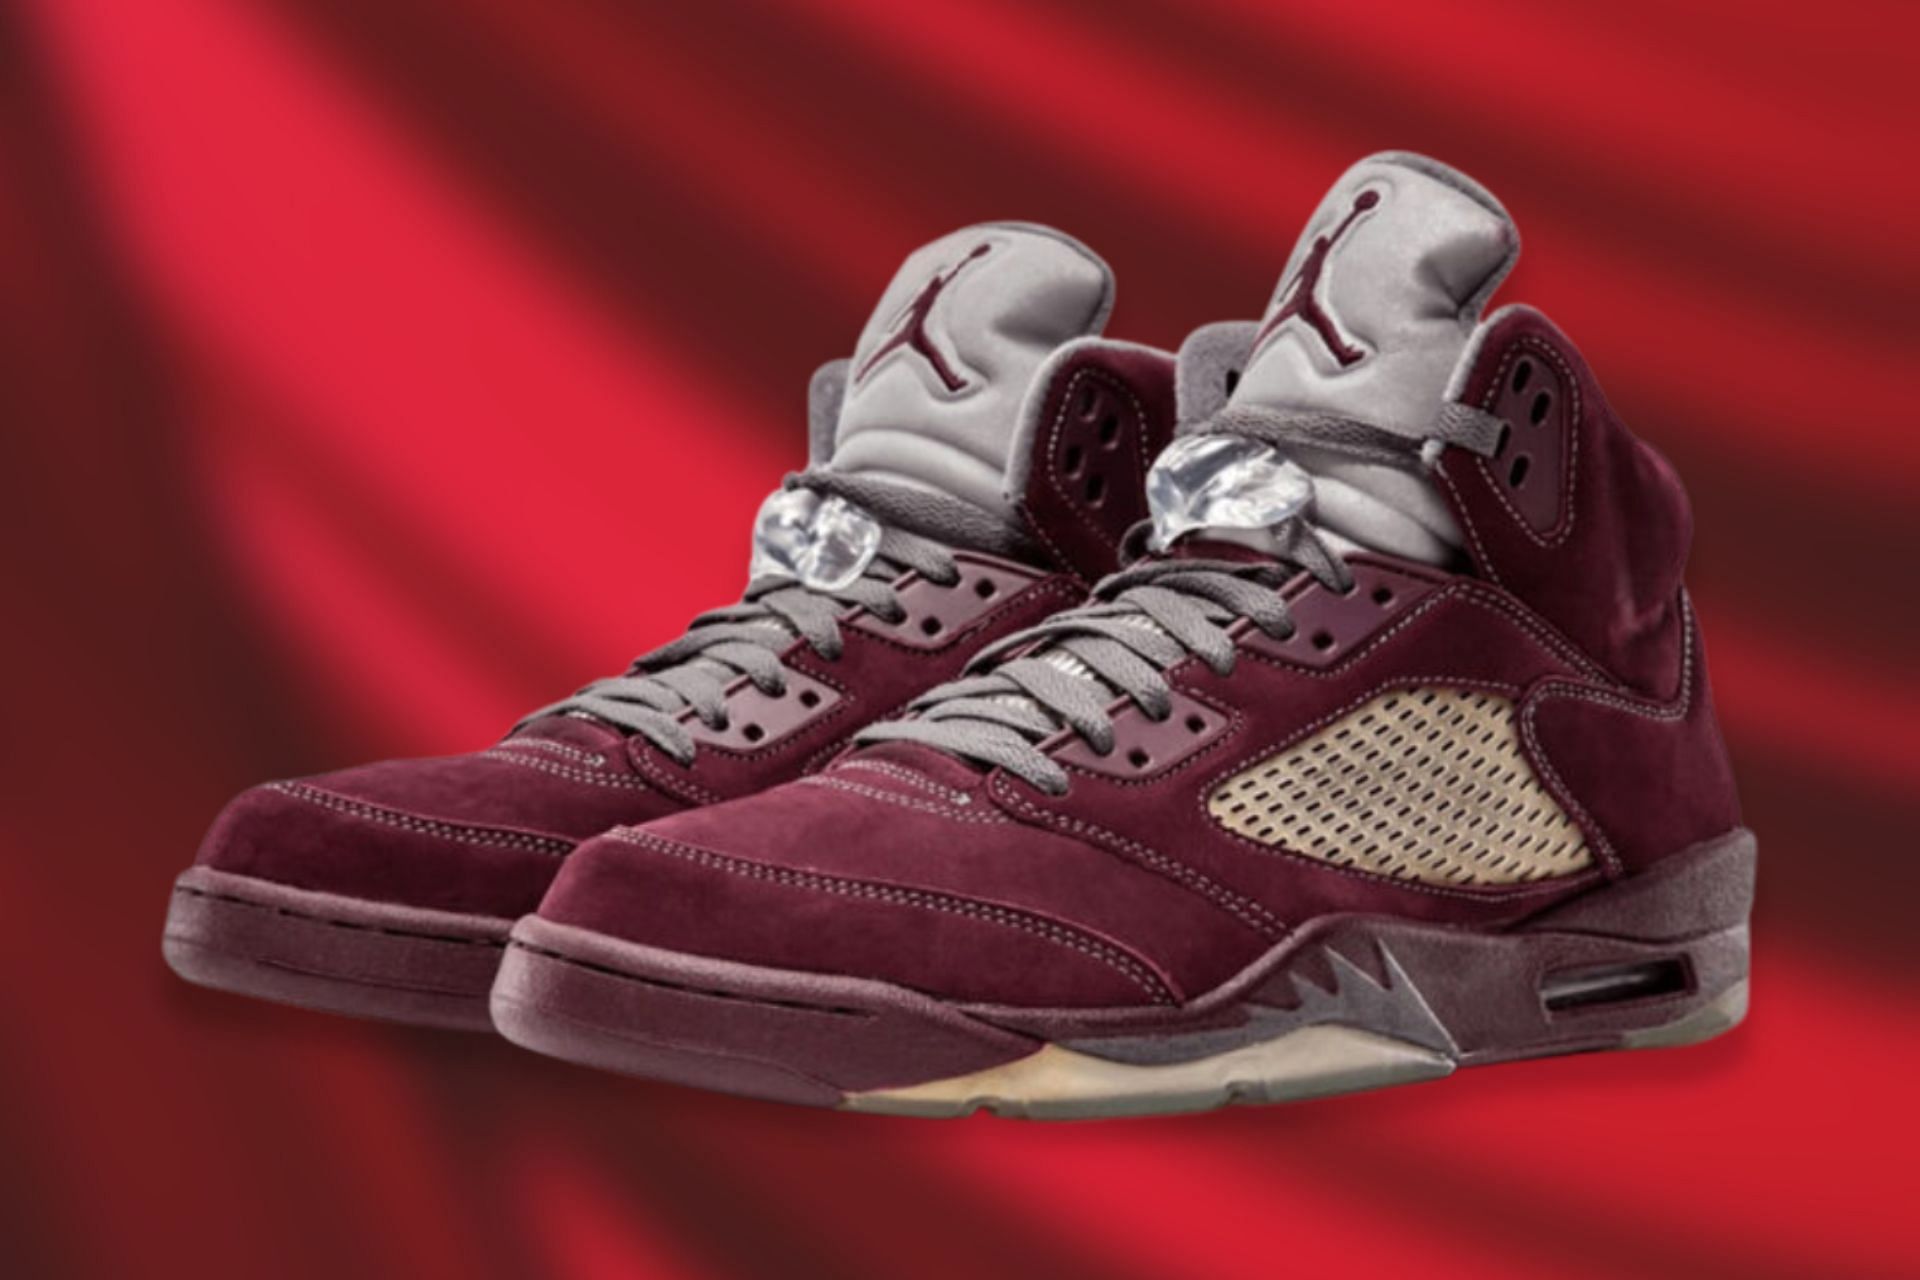 Where to buy Air Jordan 5 Retro “Burgundy” shoes? Price, release date